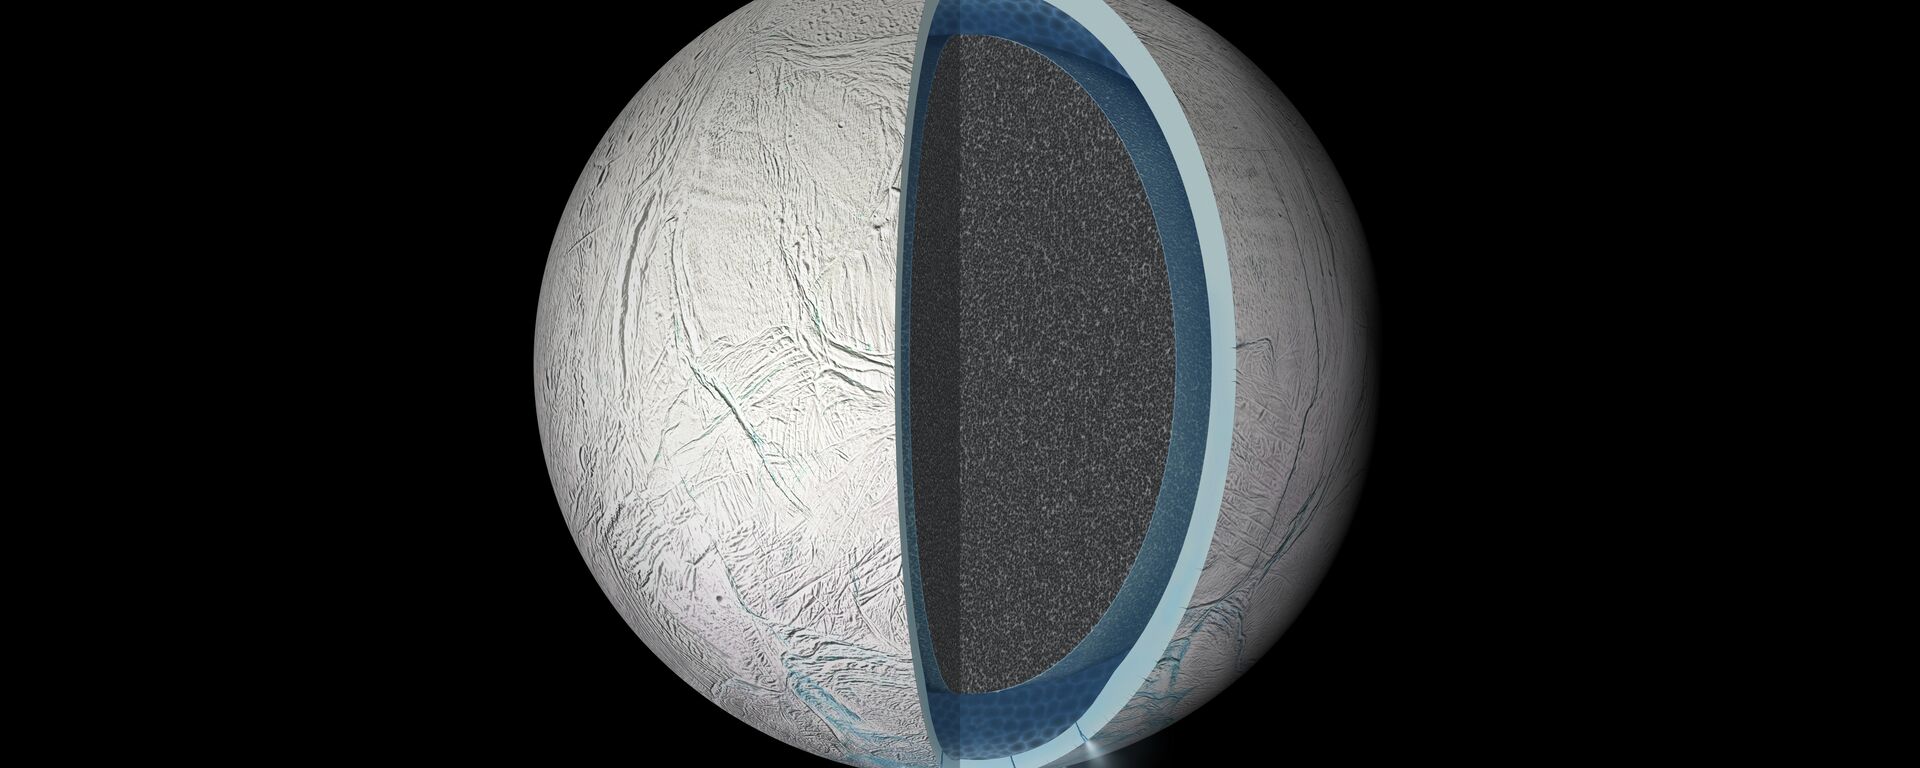 Illustration of the interior of Saturn's moon Enceladus showing a water ocean between the rocky core and icy crust. Thickness of layers shown here is not to scale. - Sputnik International, 1920, 26.03.2021